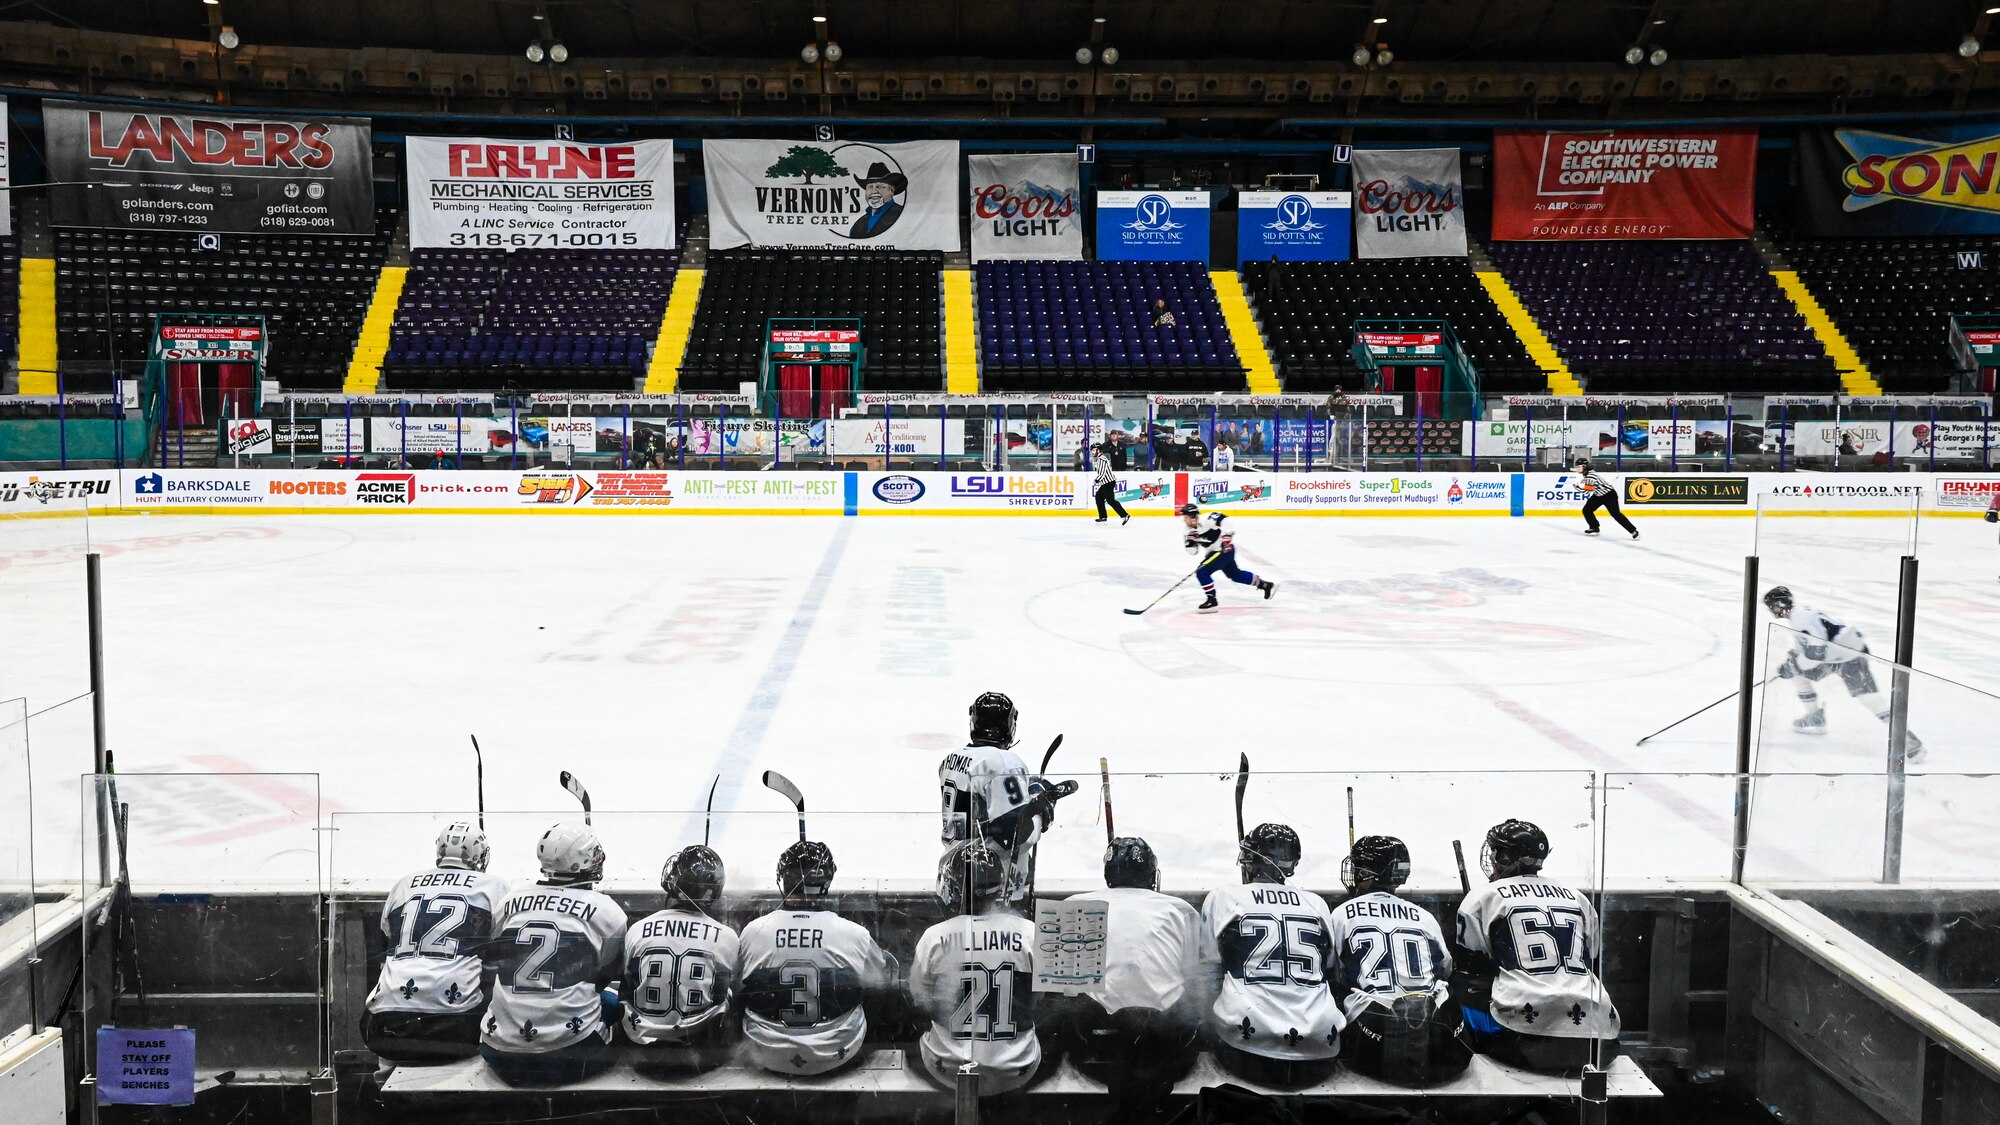 The Barksdale Bombers hockey team competes for the Mudbug Adult Hockey League championship at Hirsch Memorial Coliseum in Shreveport, Louisiana, March 31, 2021.